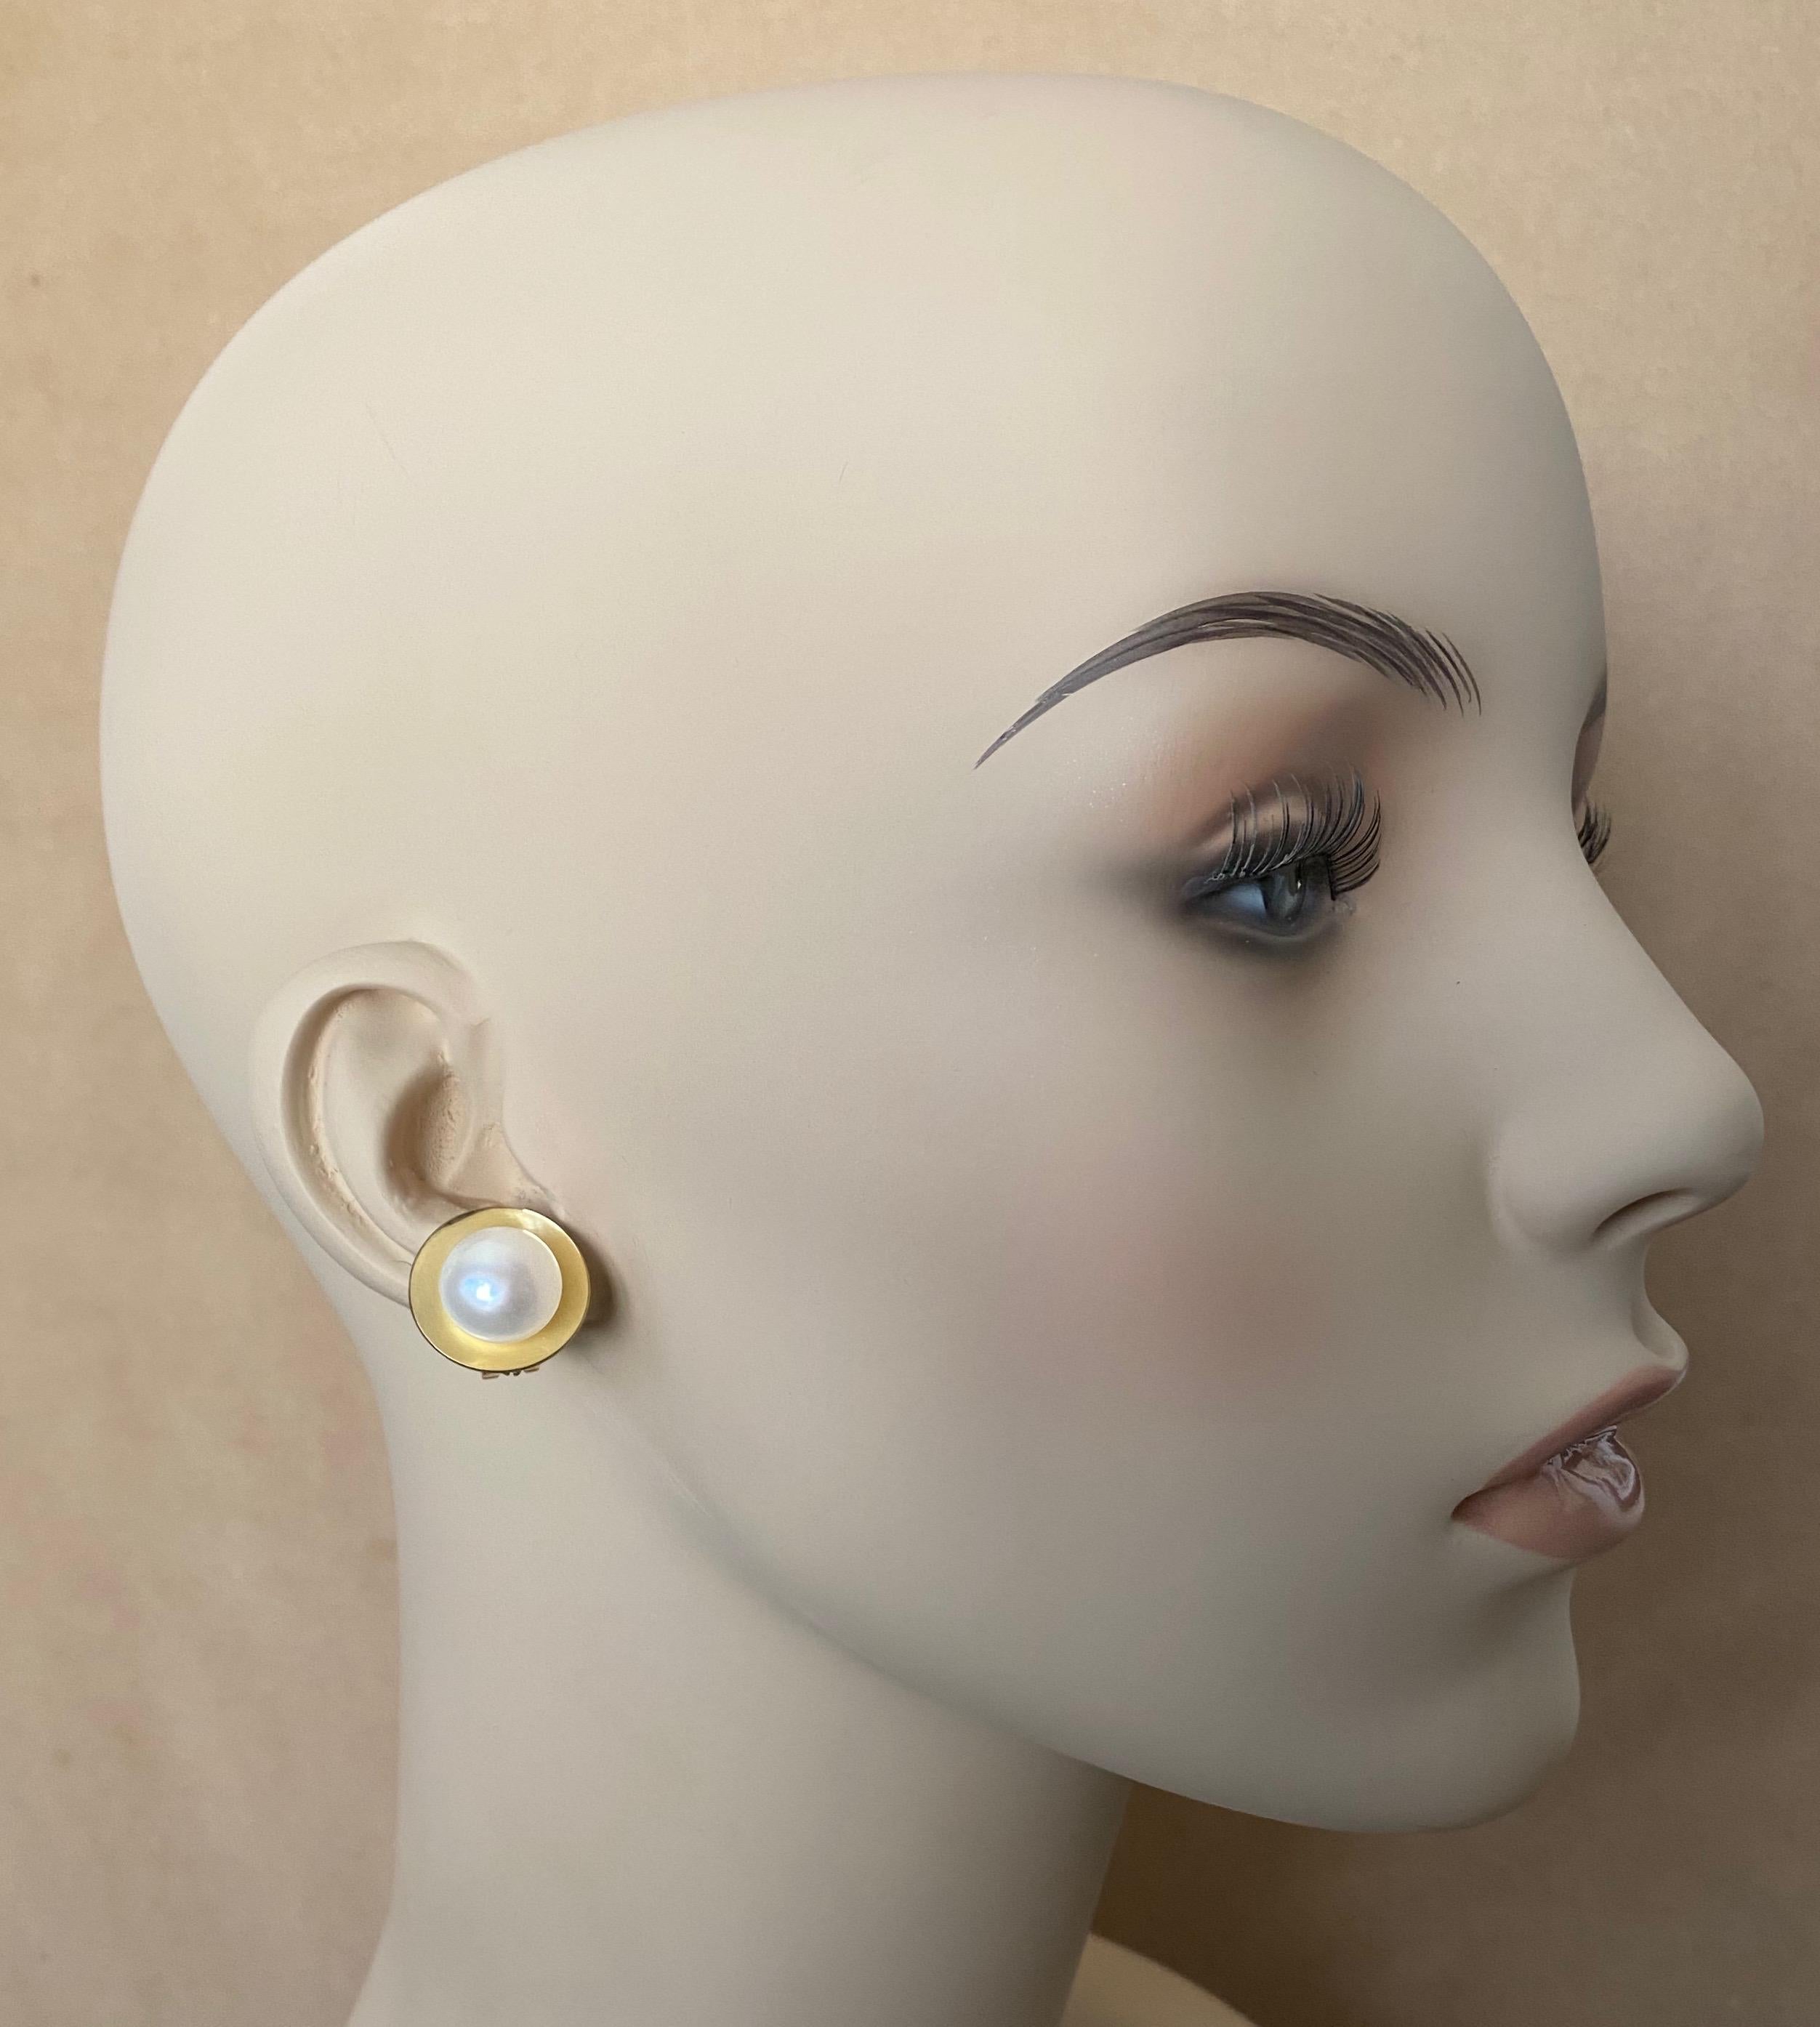 13mm bright white button pearls are featured in these 18k gold earrings.  The pearls possess wonderful luster and are blemish free.  The pearls are set within highly polished convex disks that reflect the pearl, creating a satin appearance.  The